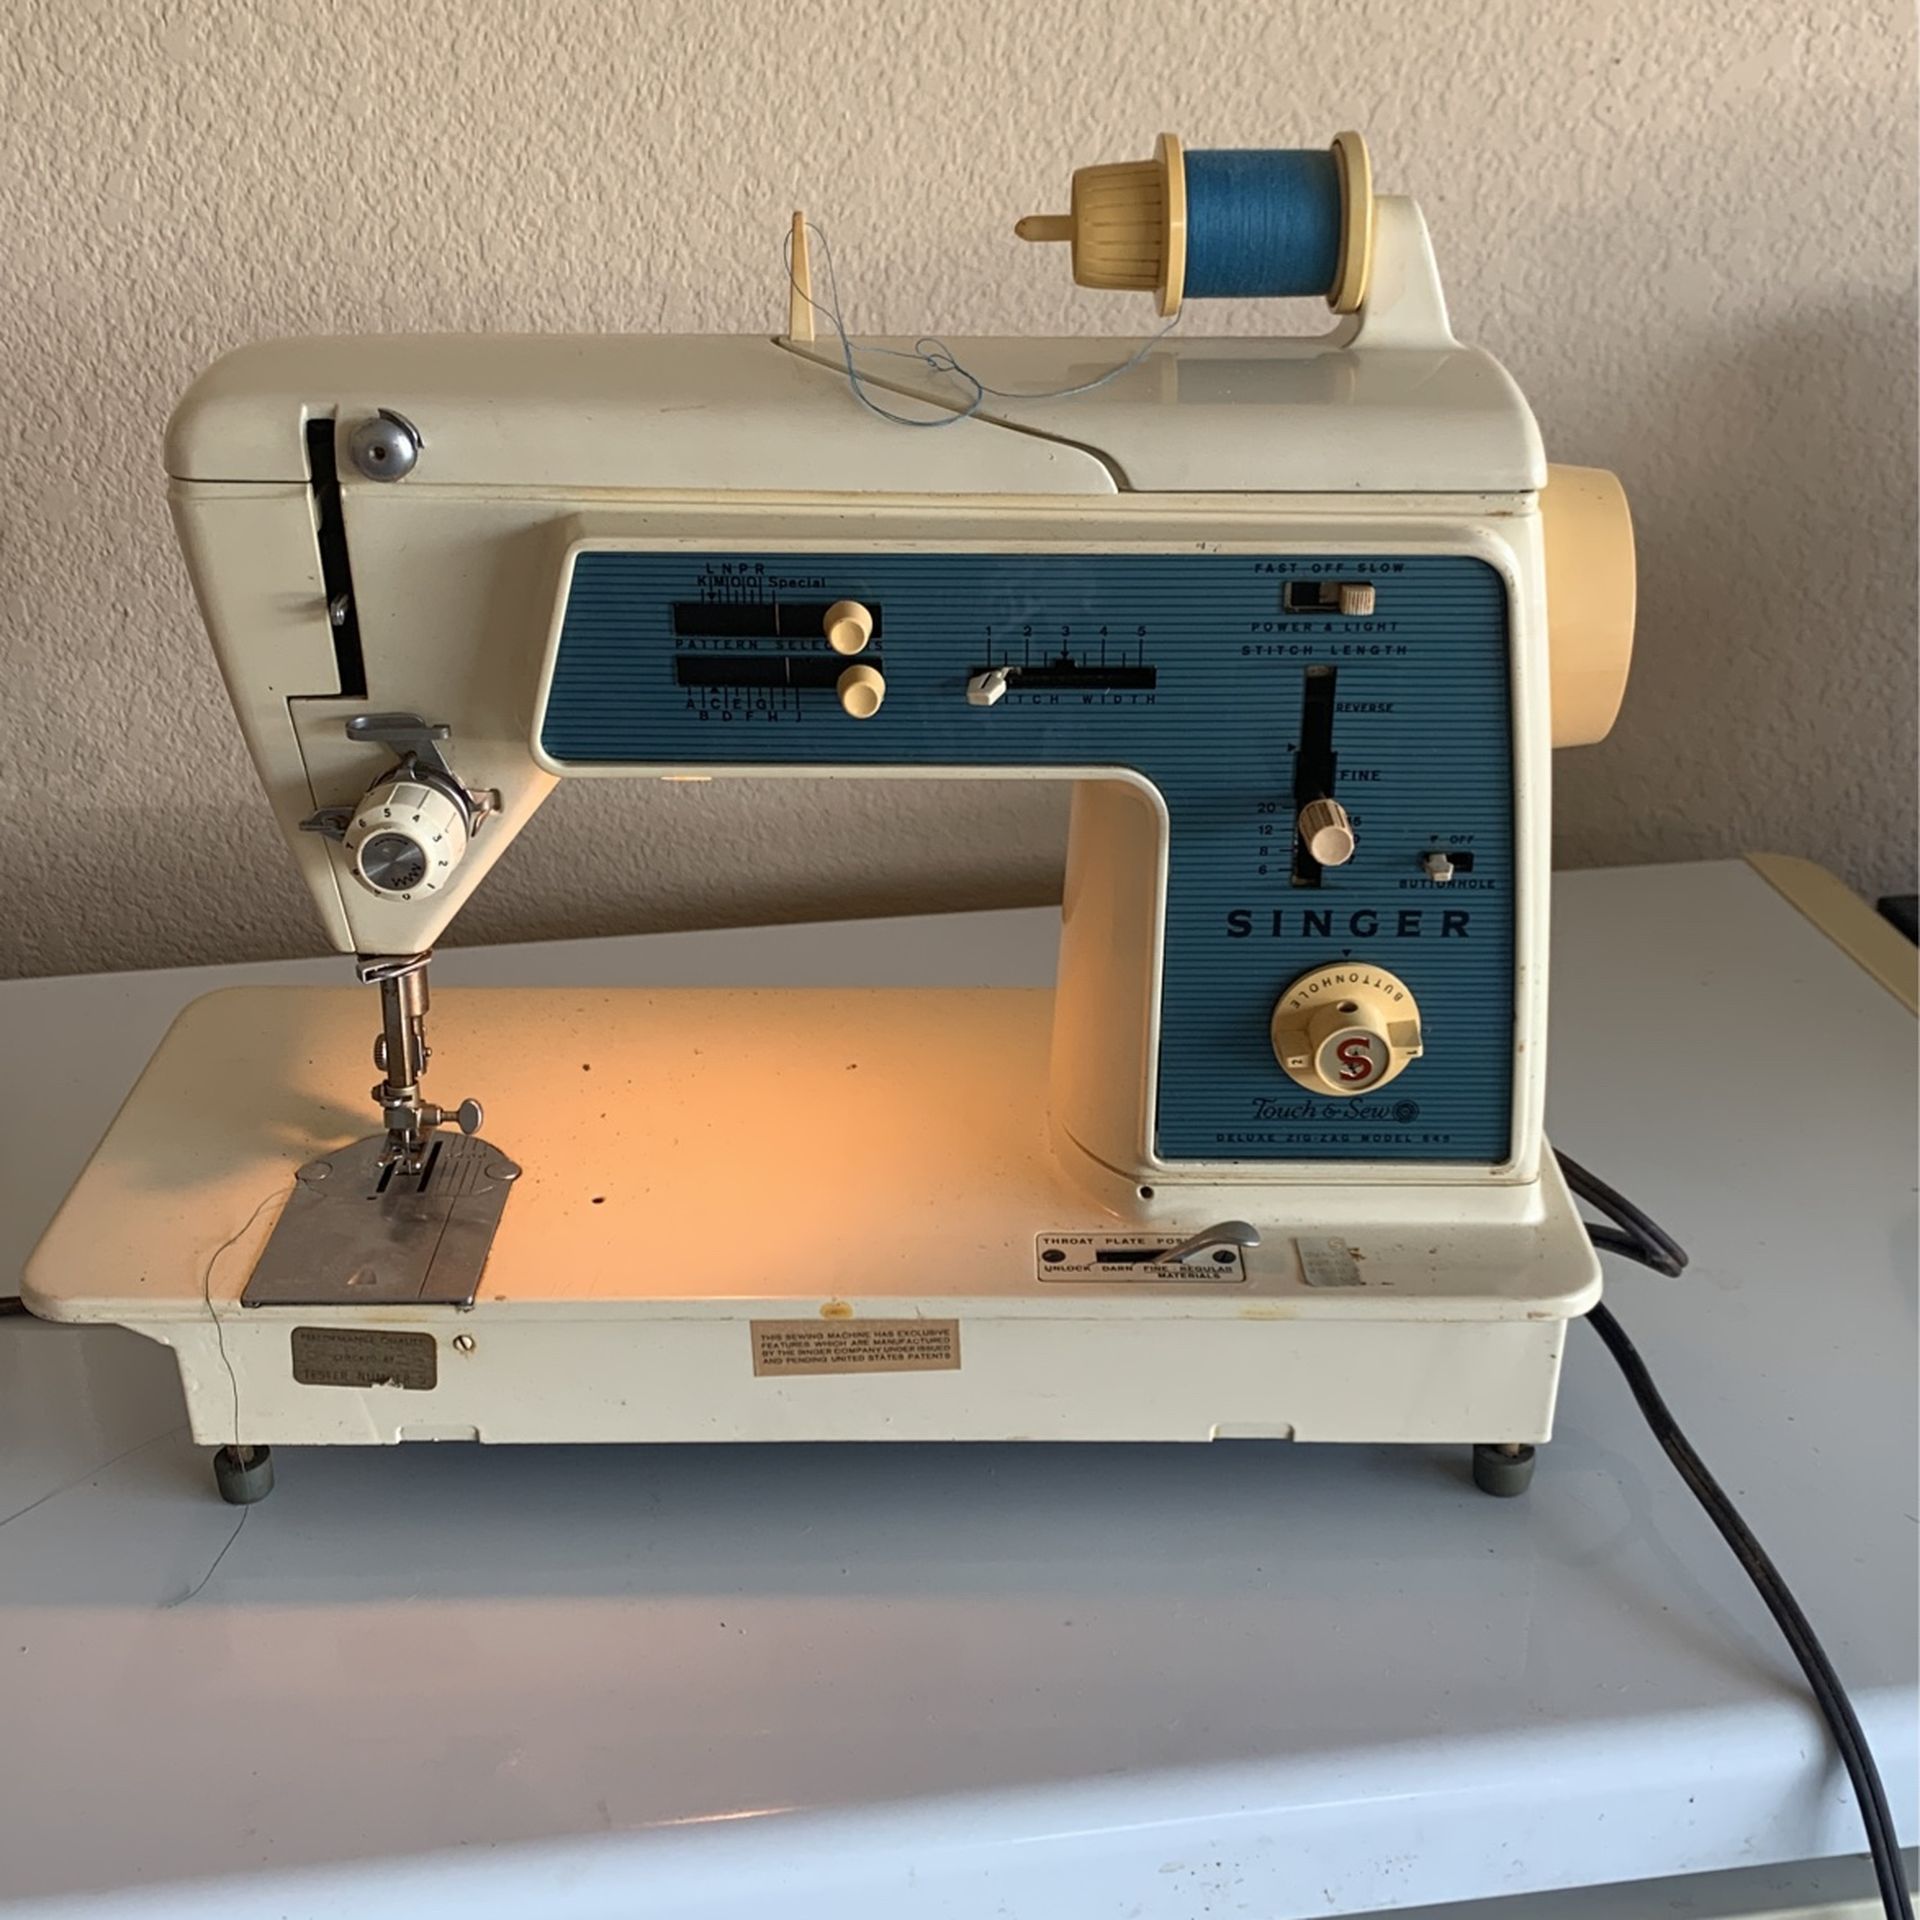 This sewing machine works but runs slowly .  GREAT FOR An ANTIQUE COLLECTION or can someone fix this   Nice machine